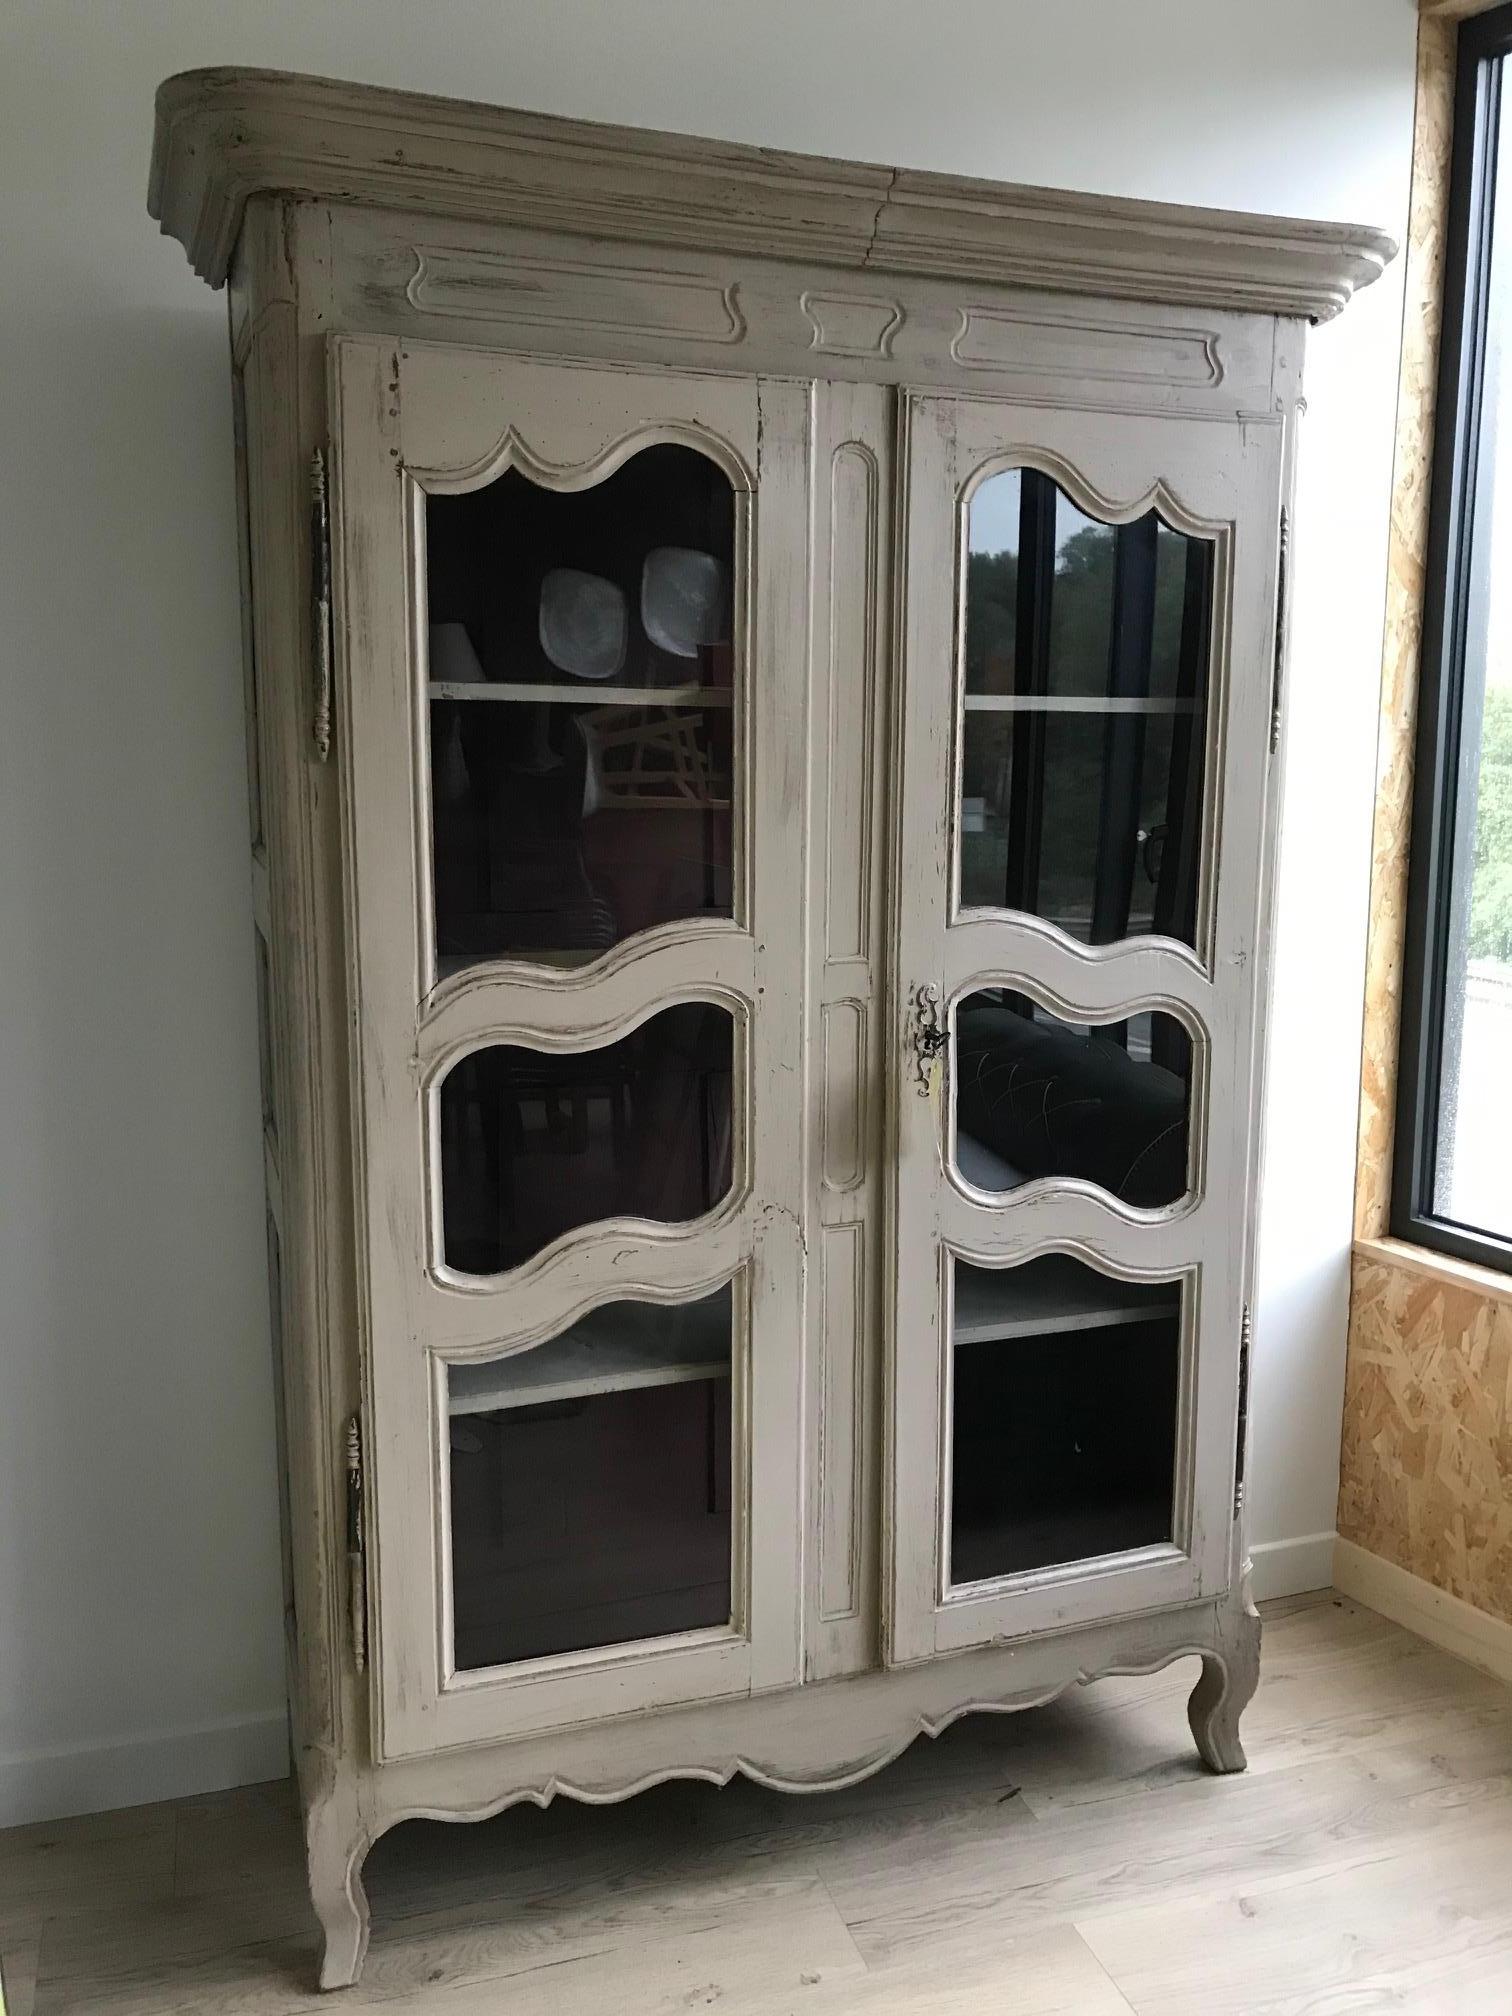 Very nice 18th century French glass patinated Bourguignonne Louis XV style Armoire.
Inside painted in light purple.
Removable cornice. Beautiful piece, high quality.